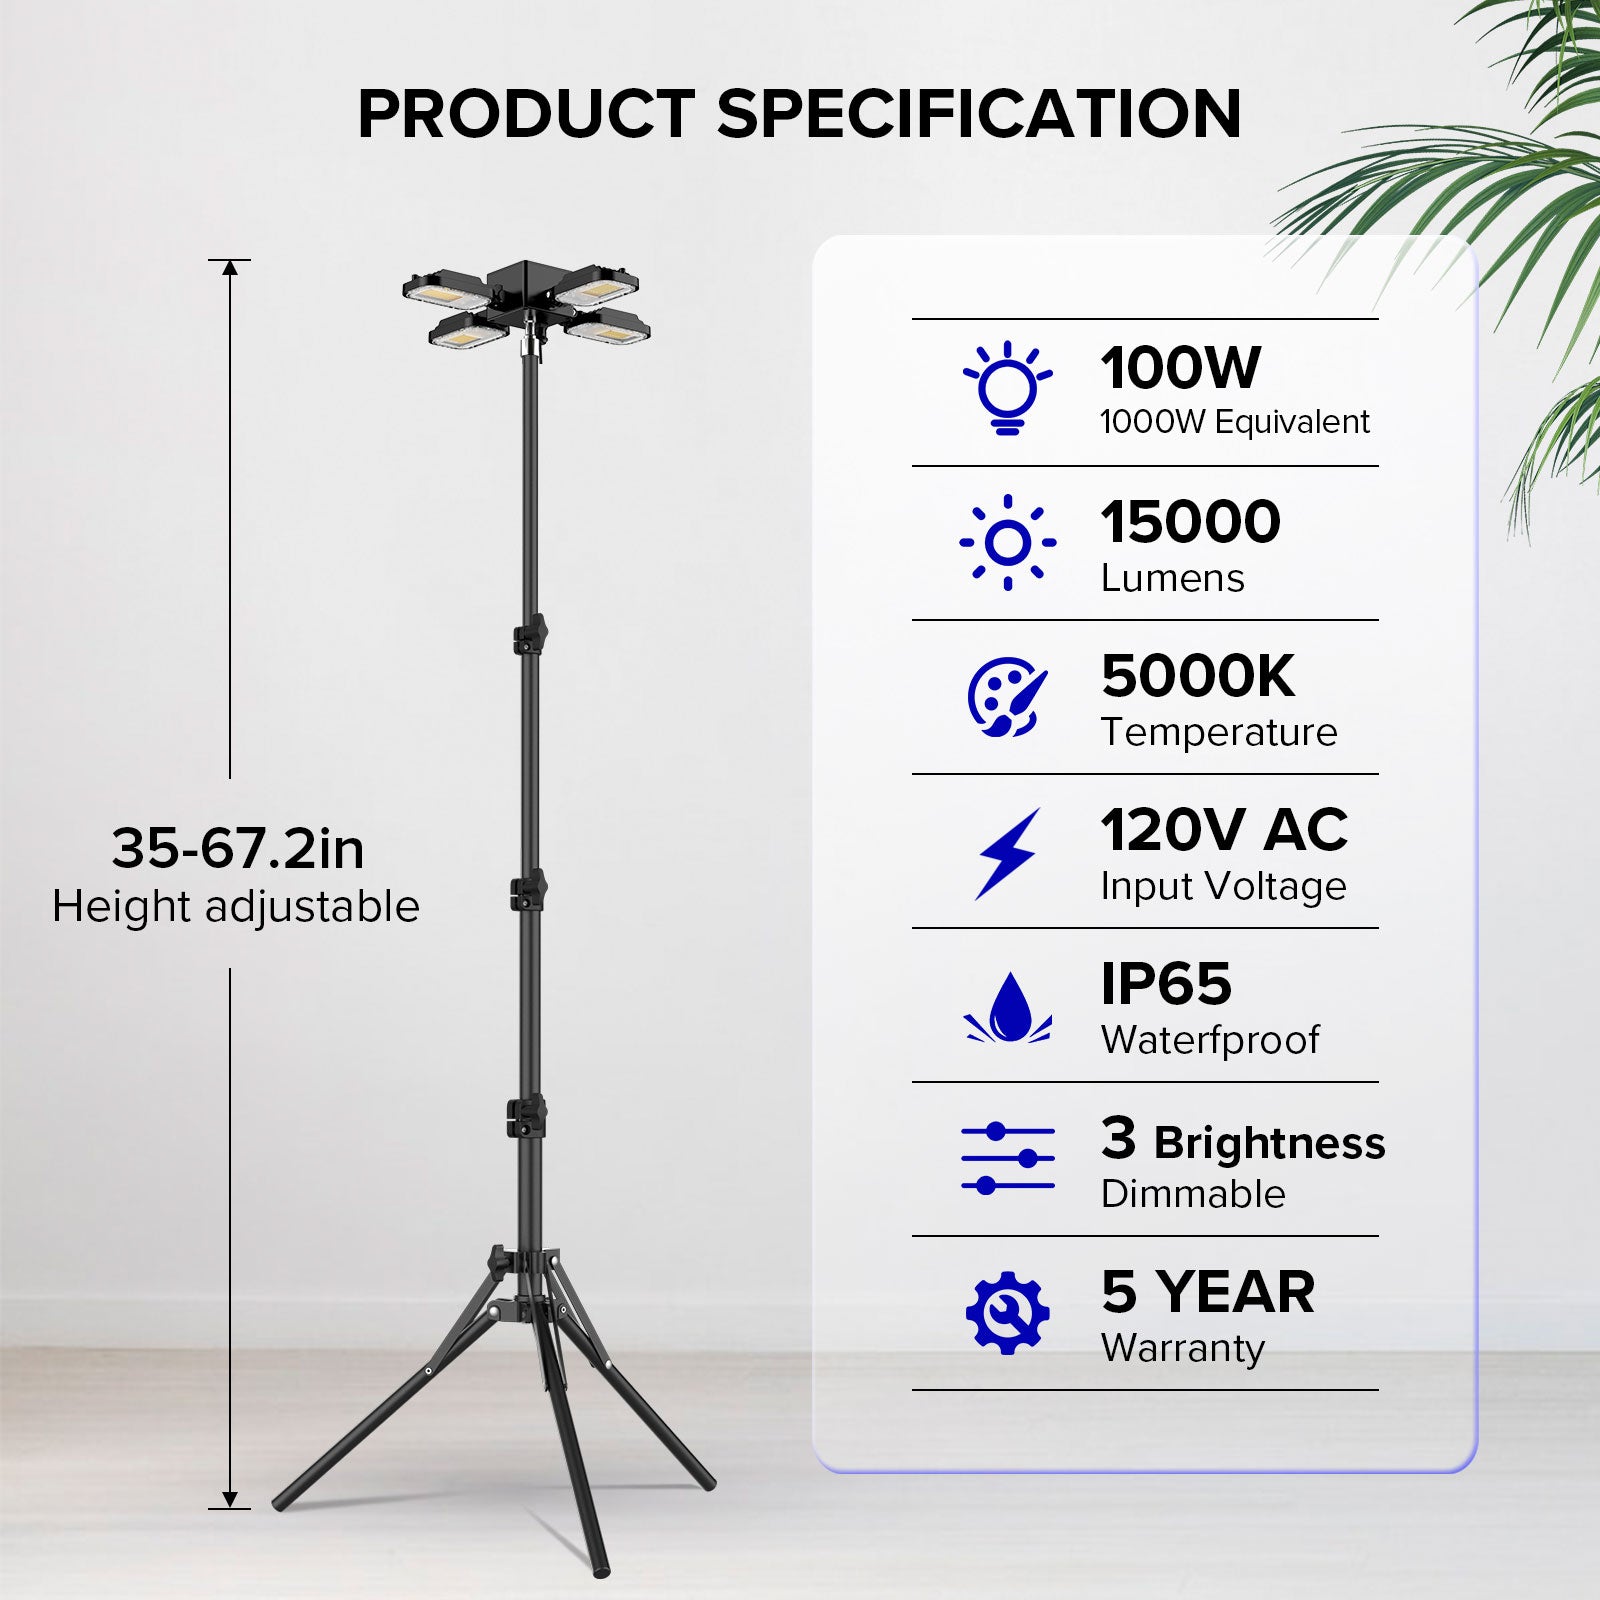 100W Adjustable 4-Head Work Light with Stand, 35-67.2in height adjuatable